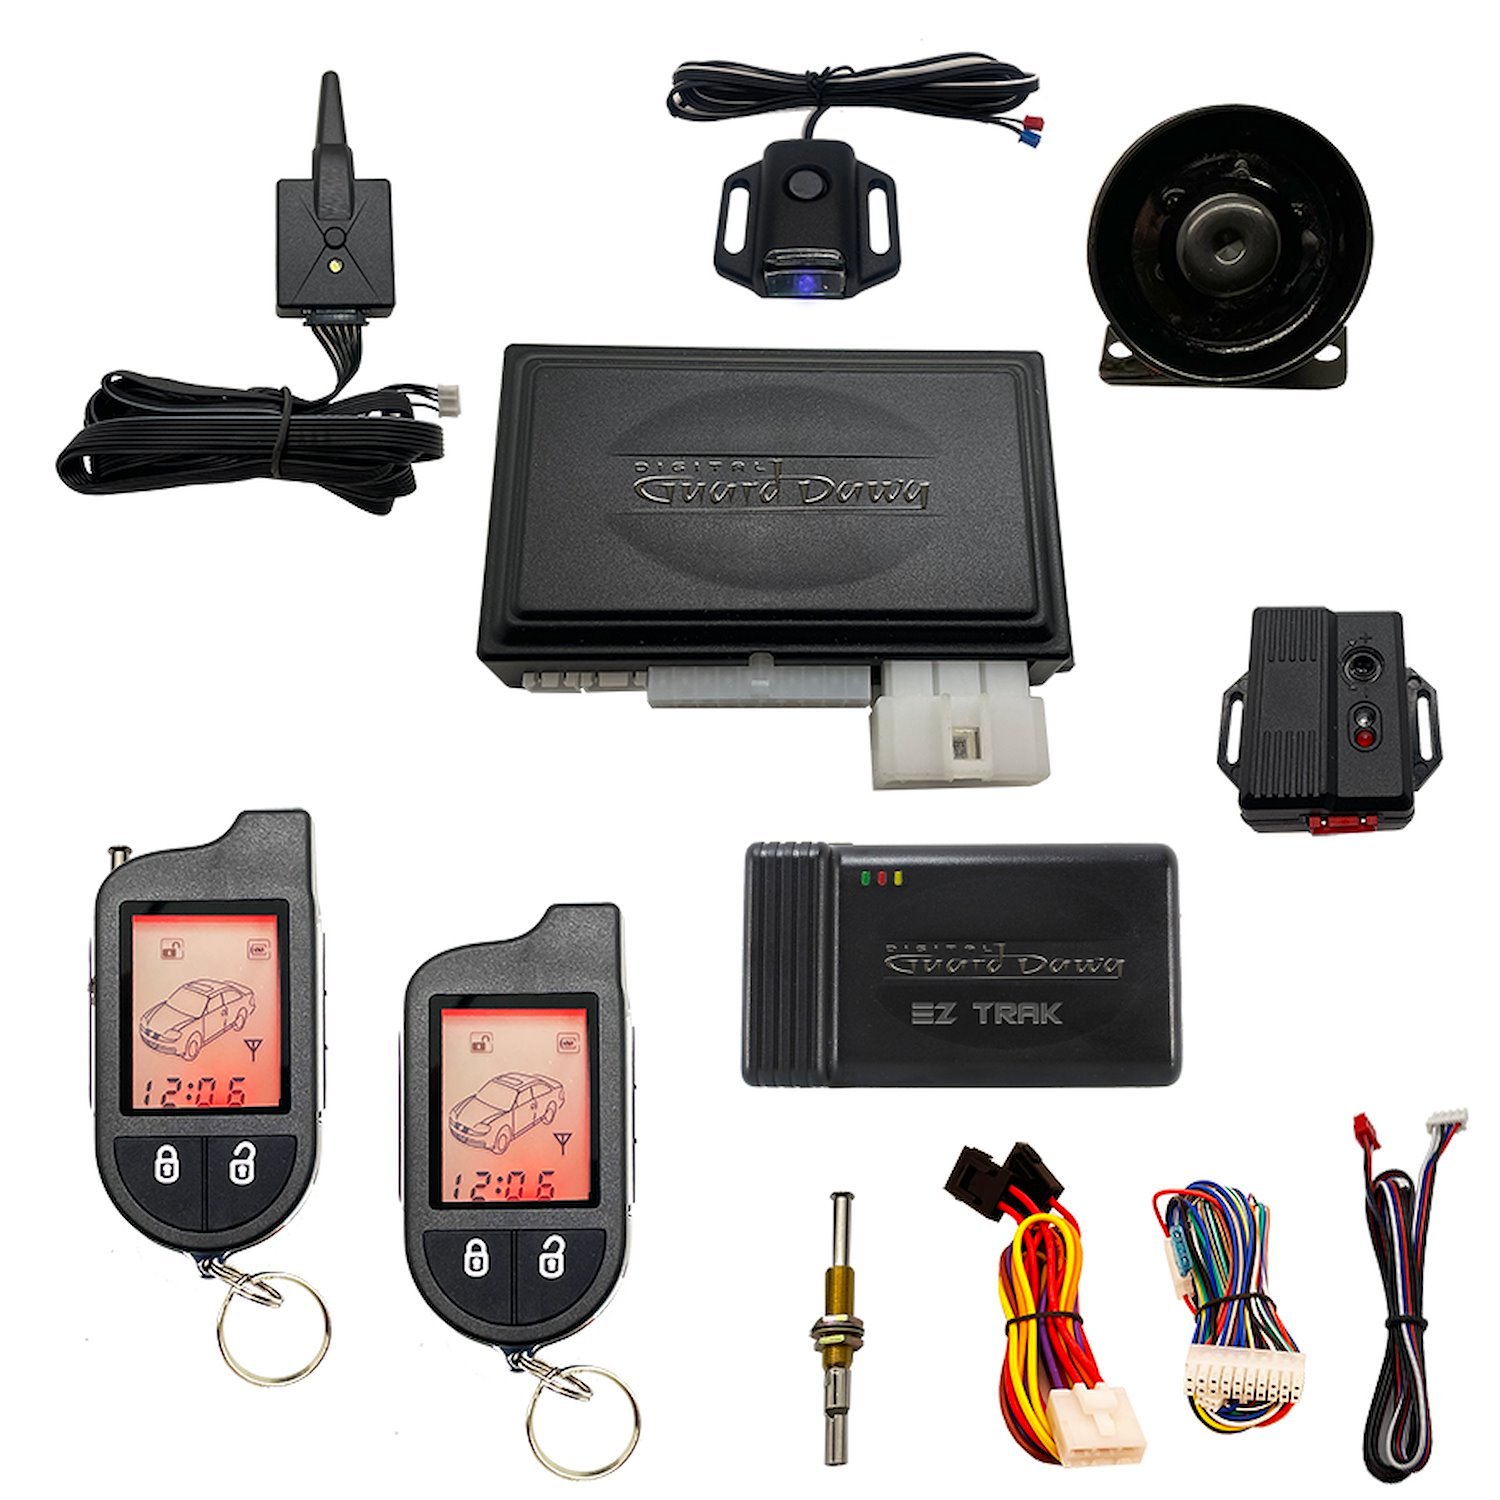 DGD-KY-ALM-RS2-EZ Keyless Entry, Alarm System, and Remote Start, 2-Way, w/ Smart Phone EZ-Tracking